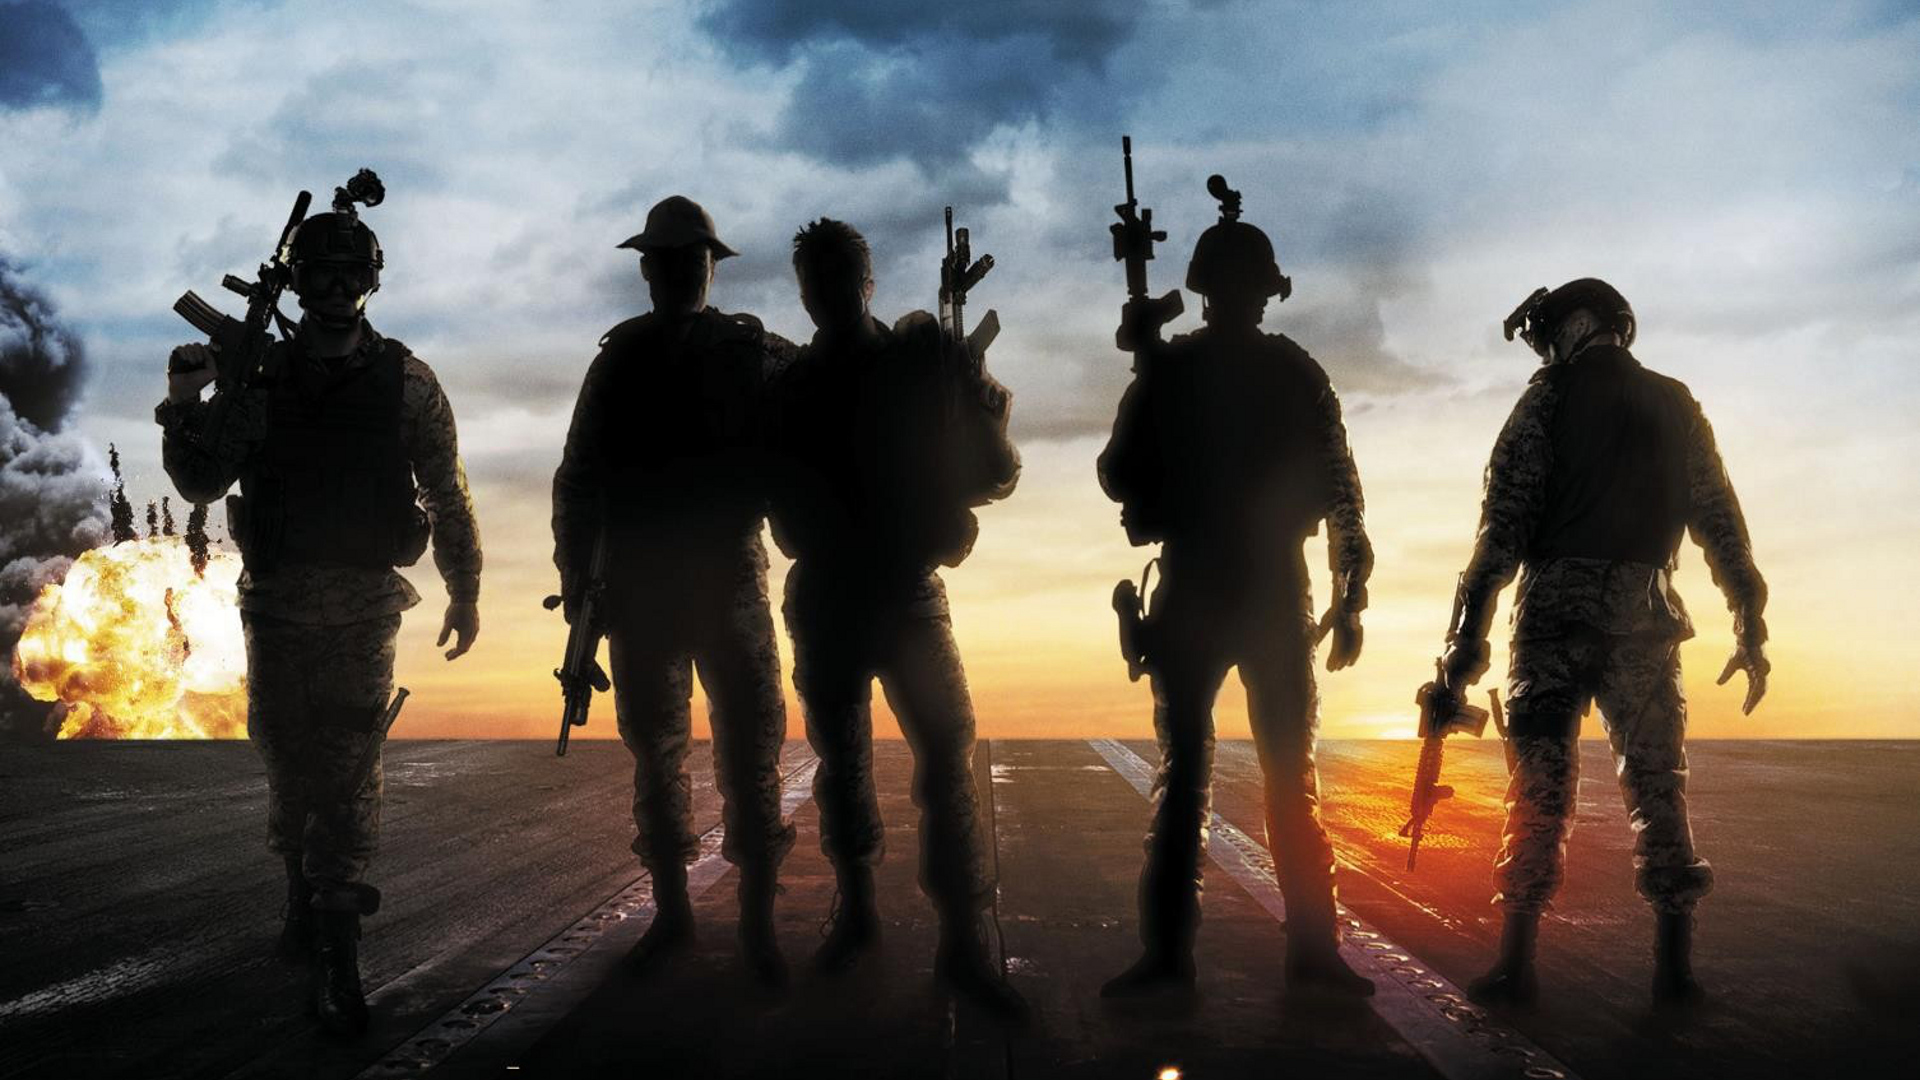 Movie Act Of Valor HD Wallpaper